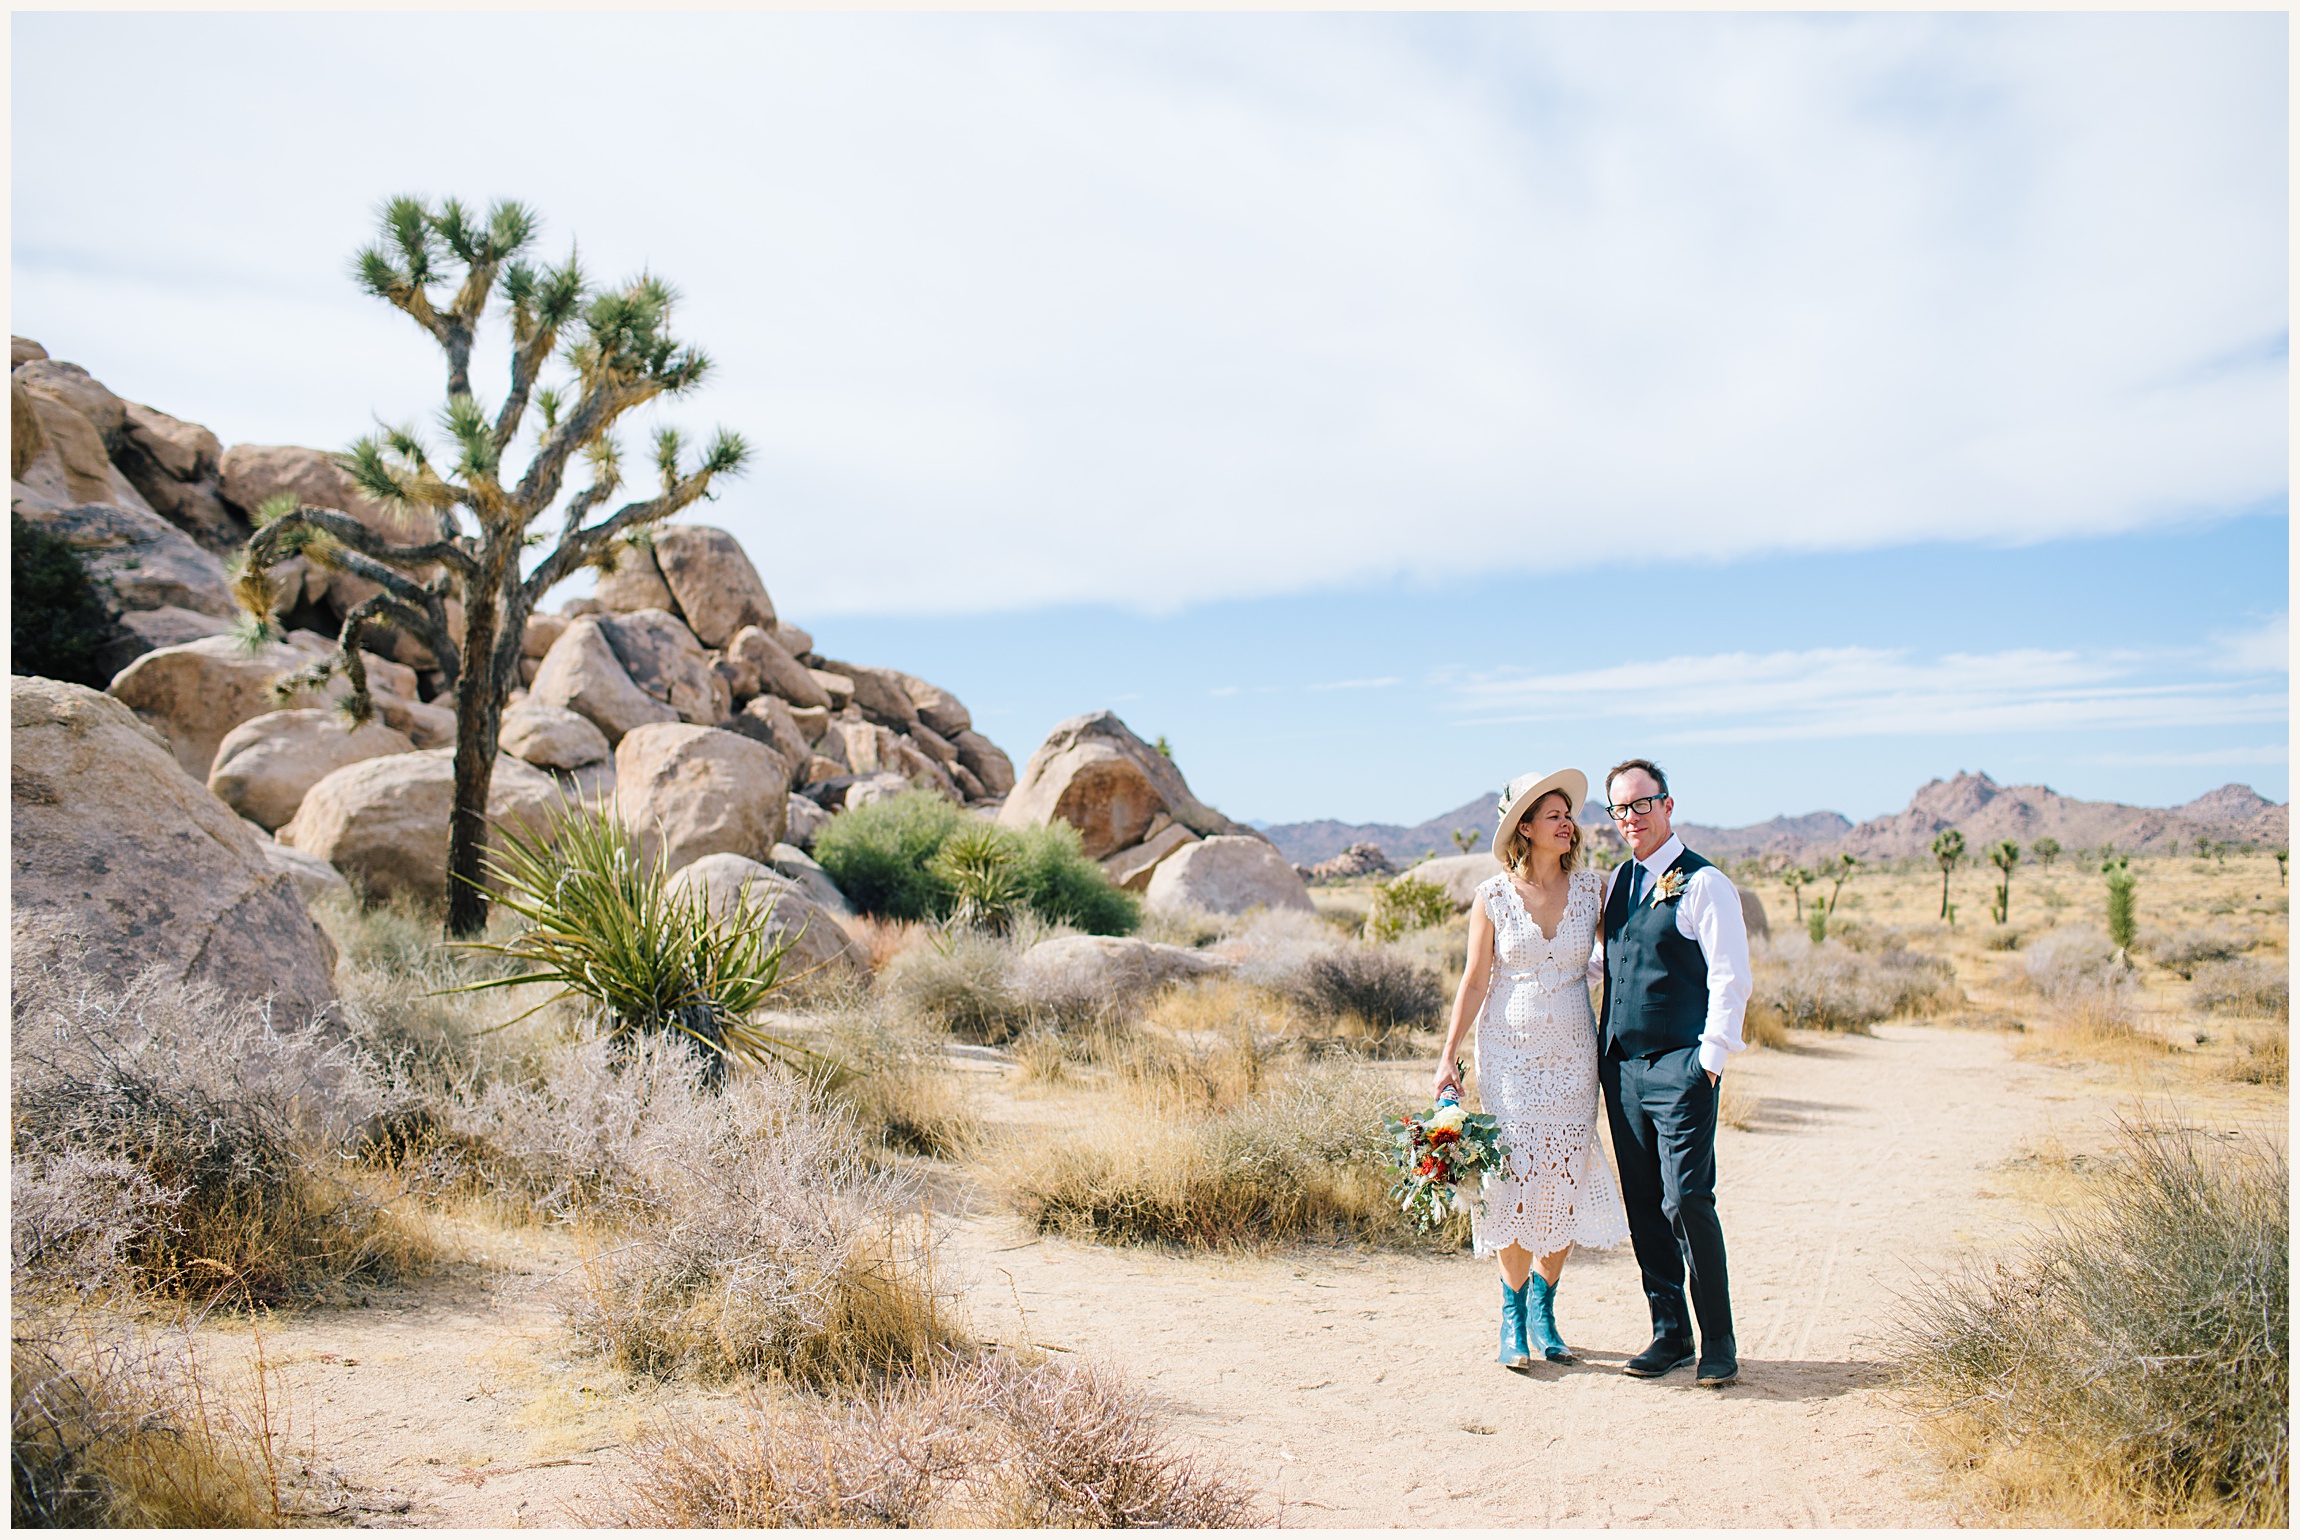 Joshua-Tree-Elopement-Joshua-Tree-Elopement-Photographer-adventure-elopement_0245 Joshua Tree Elopement Guide: Where, How & When to Elope to this Dreamy Destination